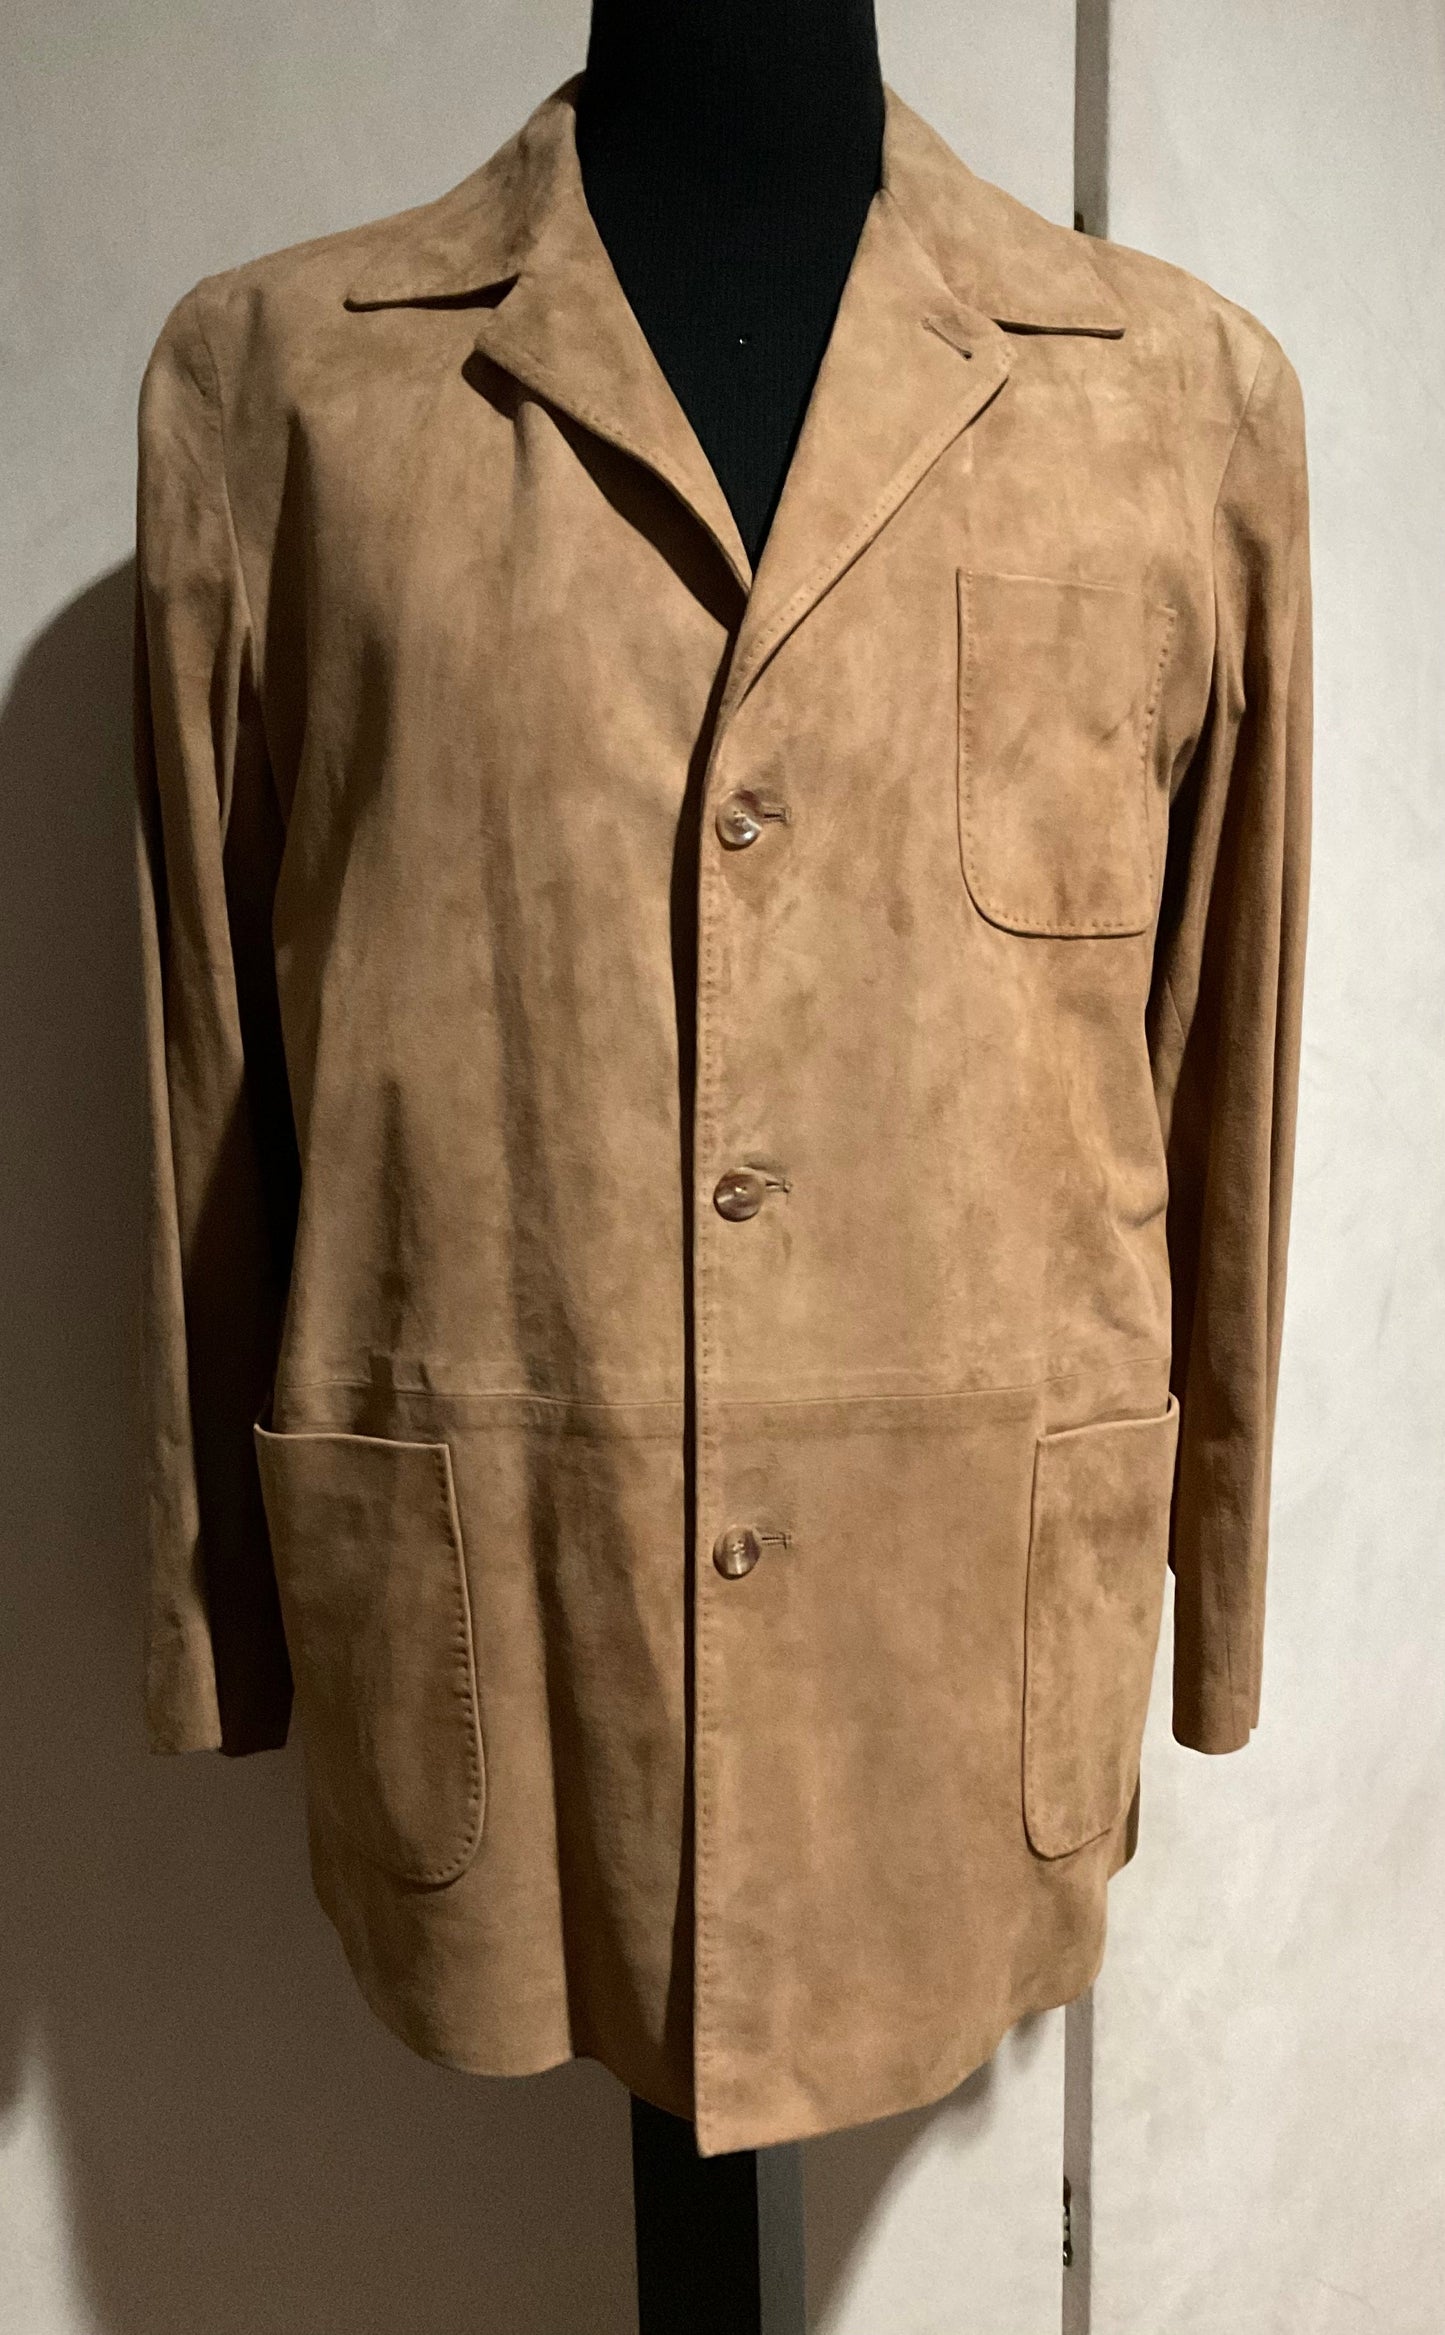 R P SUEDE JACKET / MEDIUM -LARGE / BROWN / NEW / MADE IN ITALY